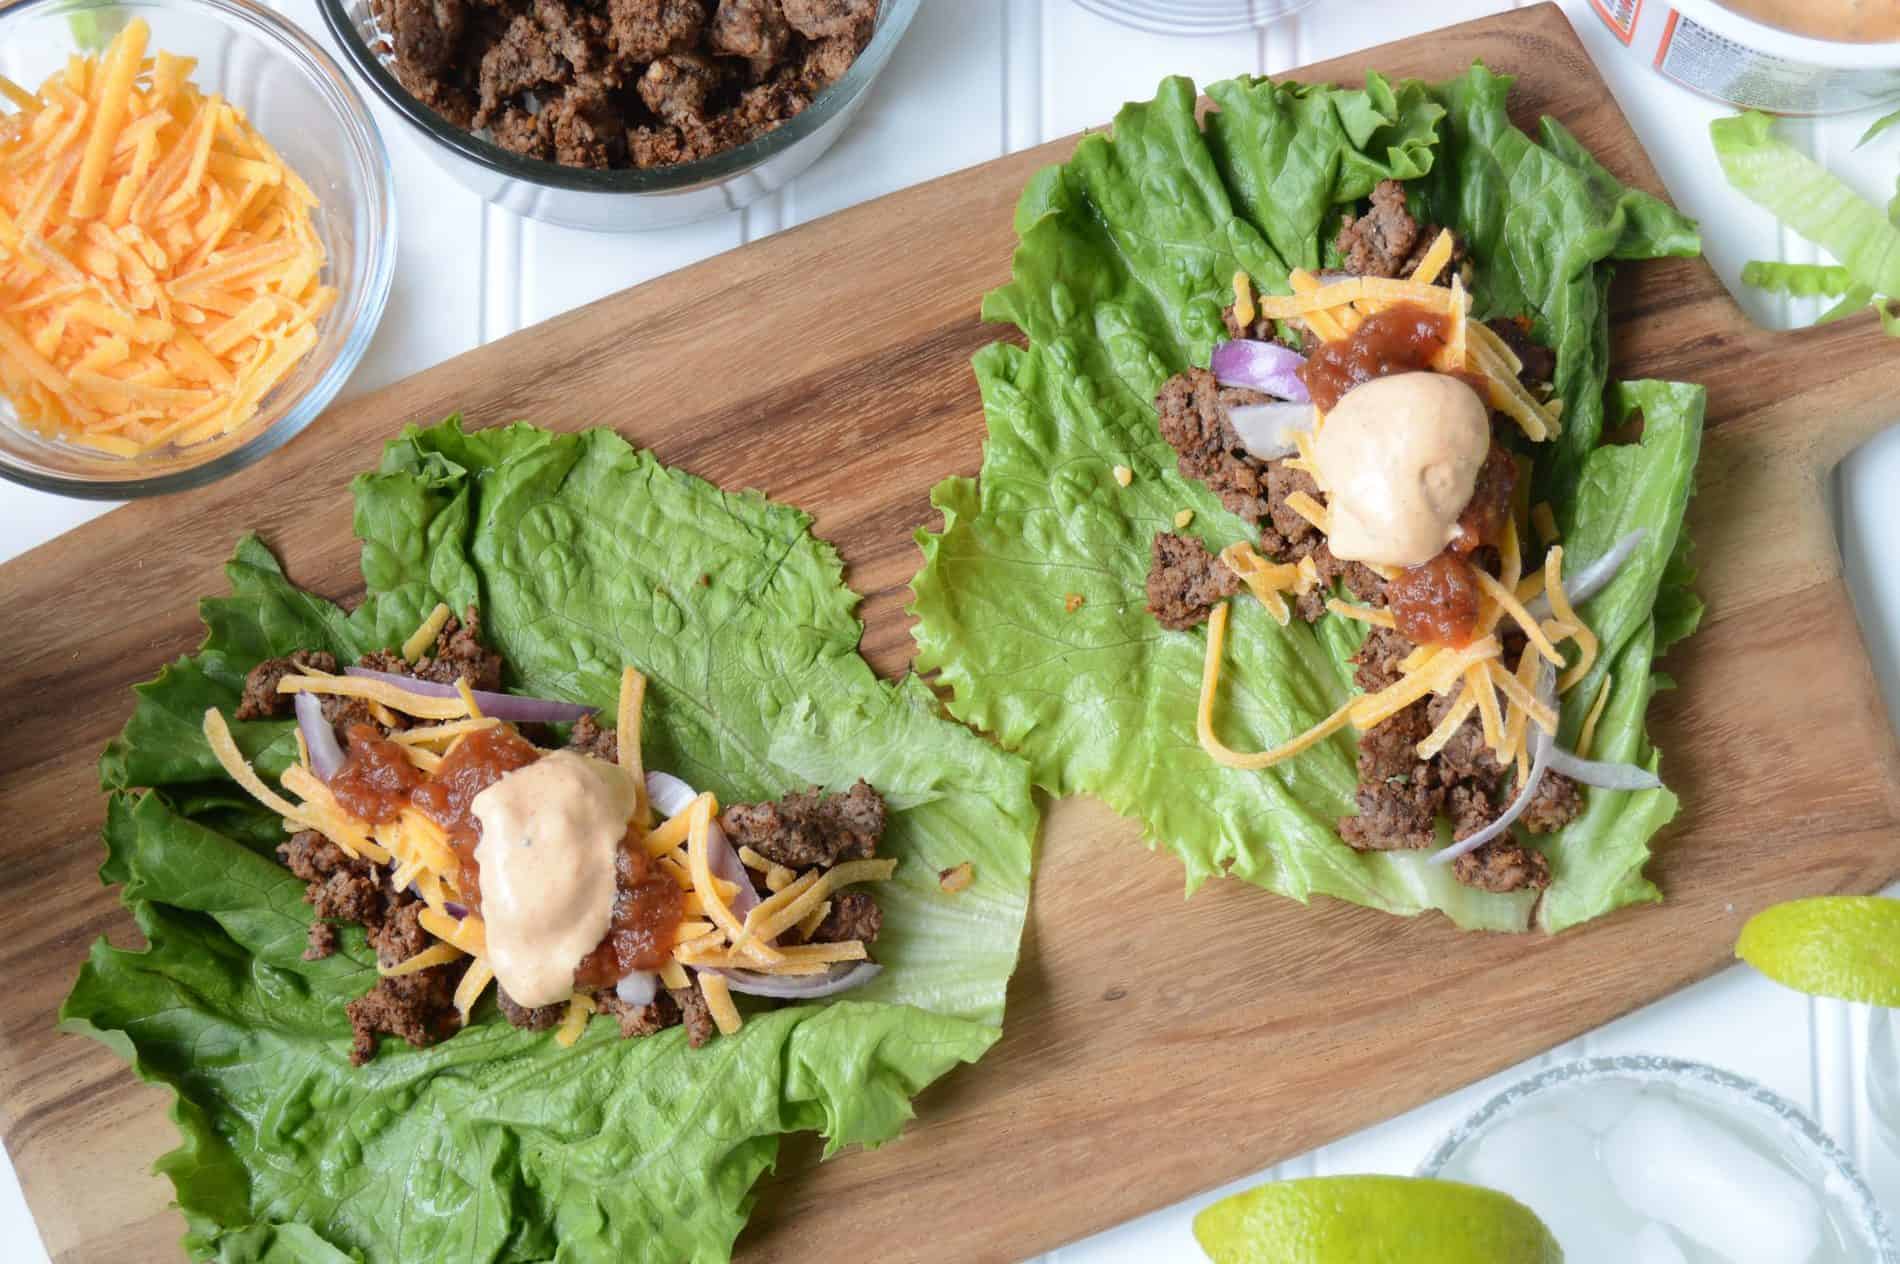 Lettuce wraps make with ground beef, cheese, red onion, Jimmy's Pineapple Salsa and Jimmy's Taco Dip